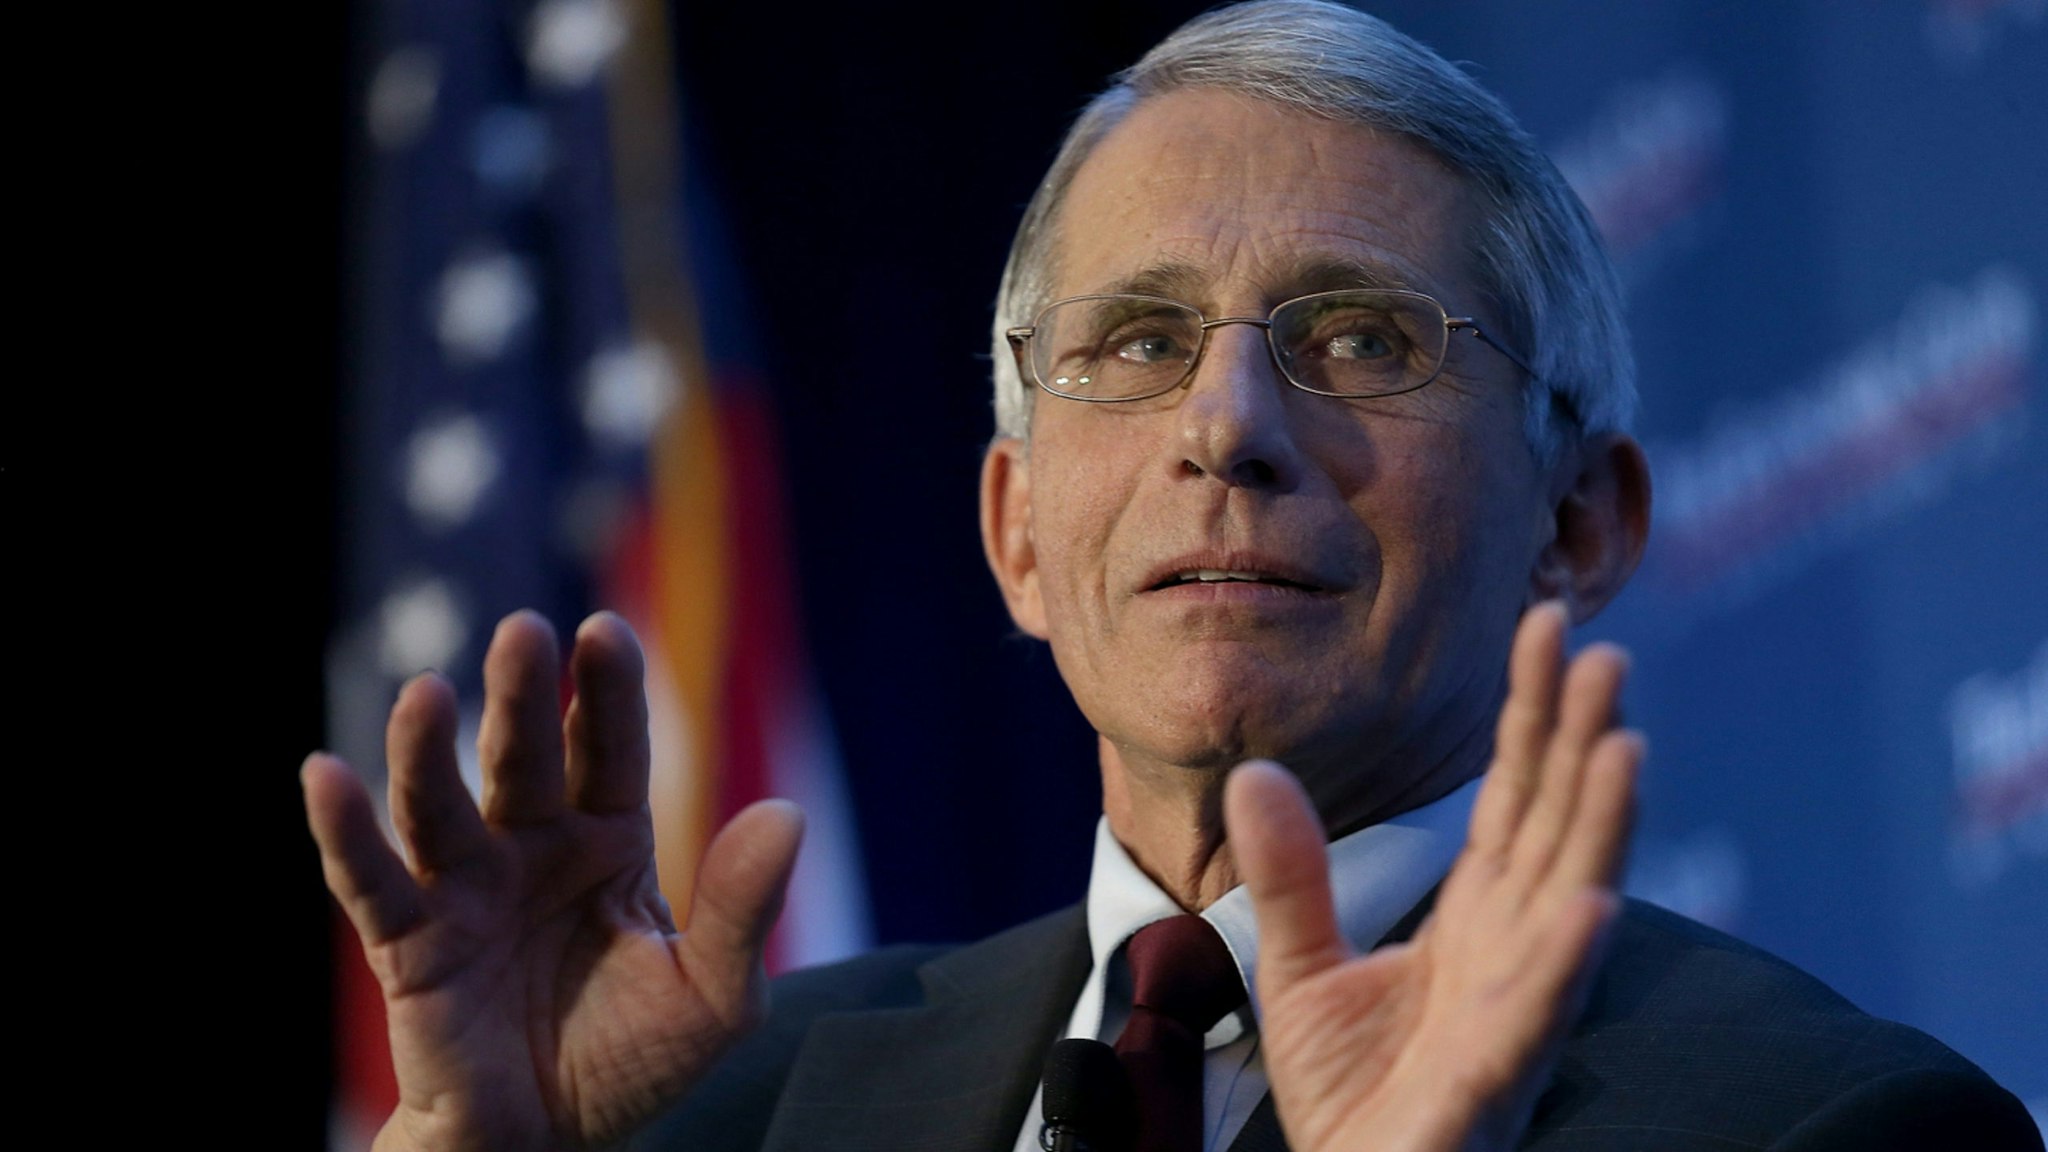 Dr. Anthony Fauci, director of the National Institute of Allergy and Infectious Diseases, discusses the Zika virus during remarks before the Economic Club of Washington January 29, 2016 in Washington, DC.